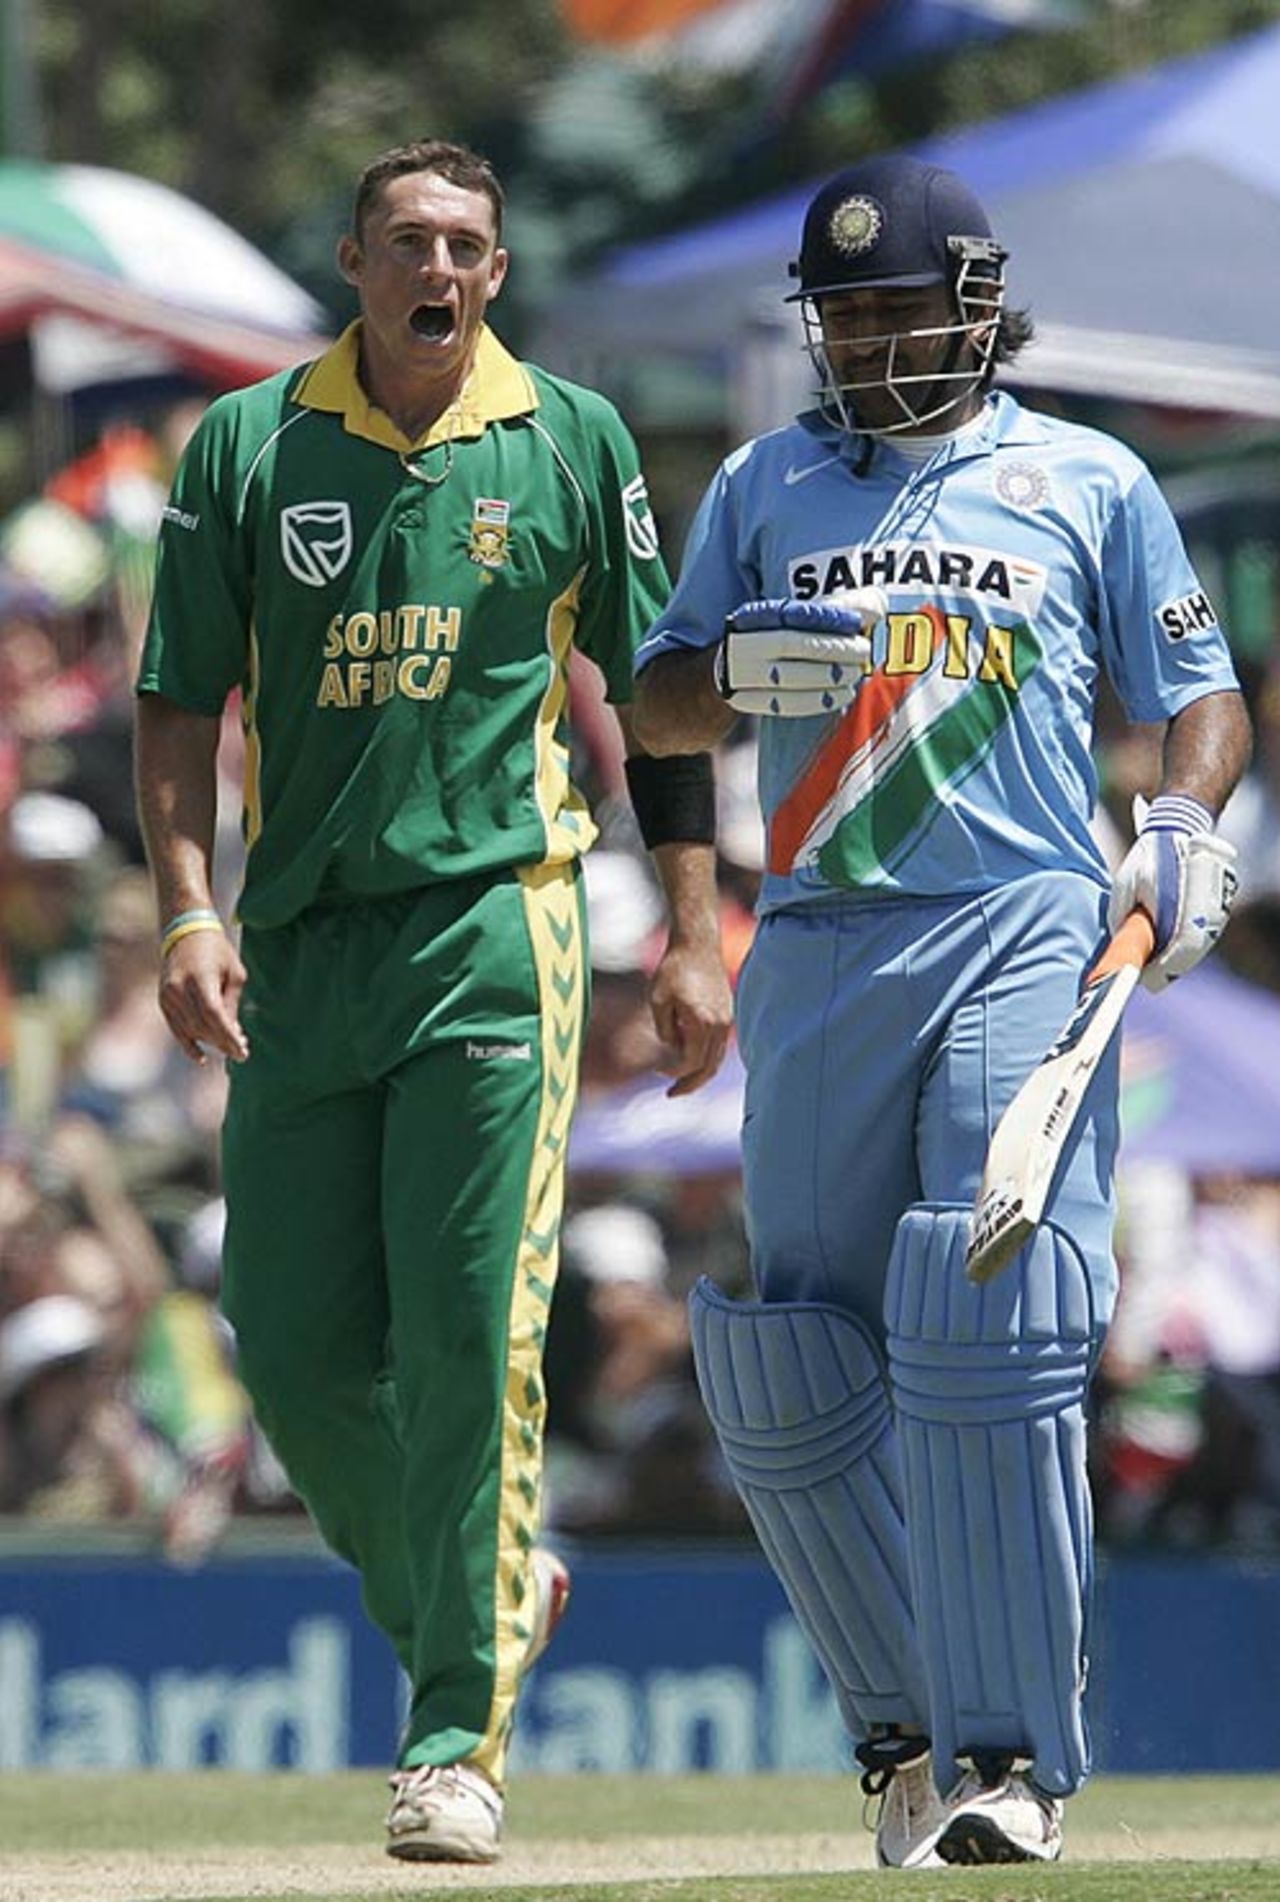 Andre Nel and Mahendra Singh Dhoni indulge in banter during India's innings, South Africa v India, 5th ODI, Centurion, December 3, 2006